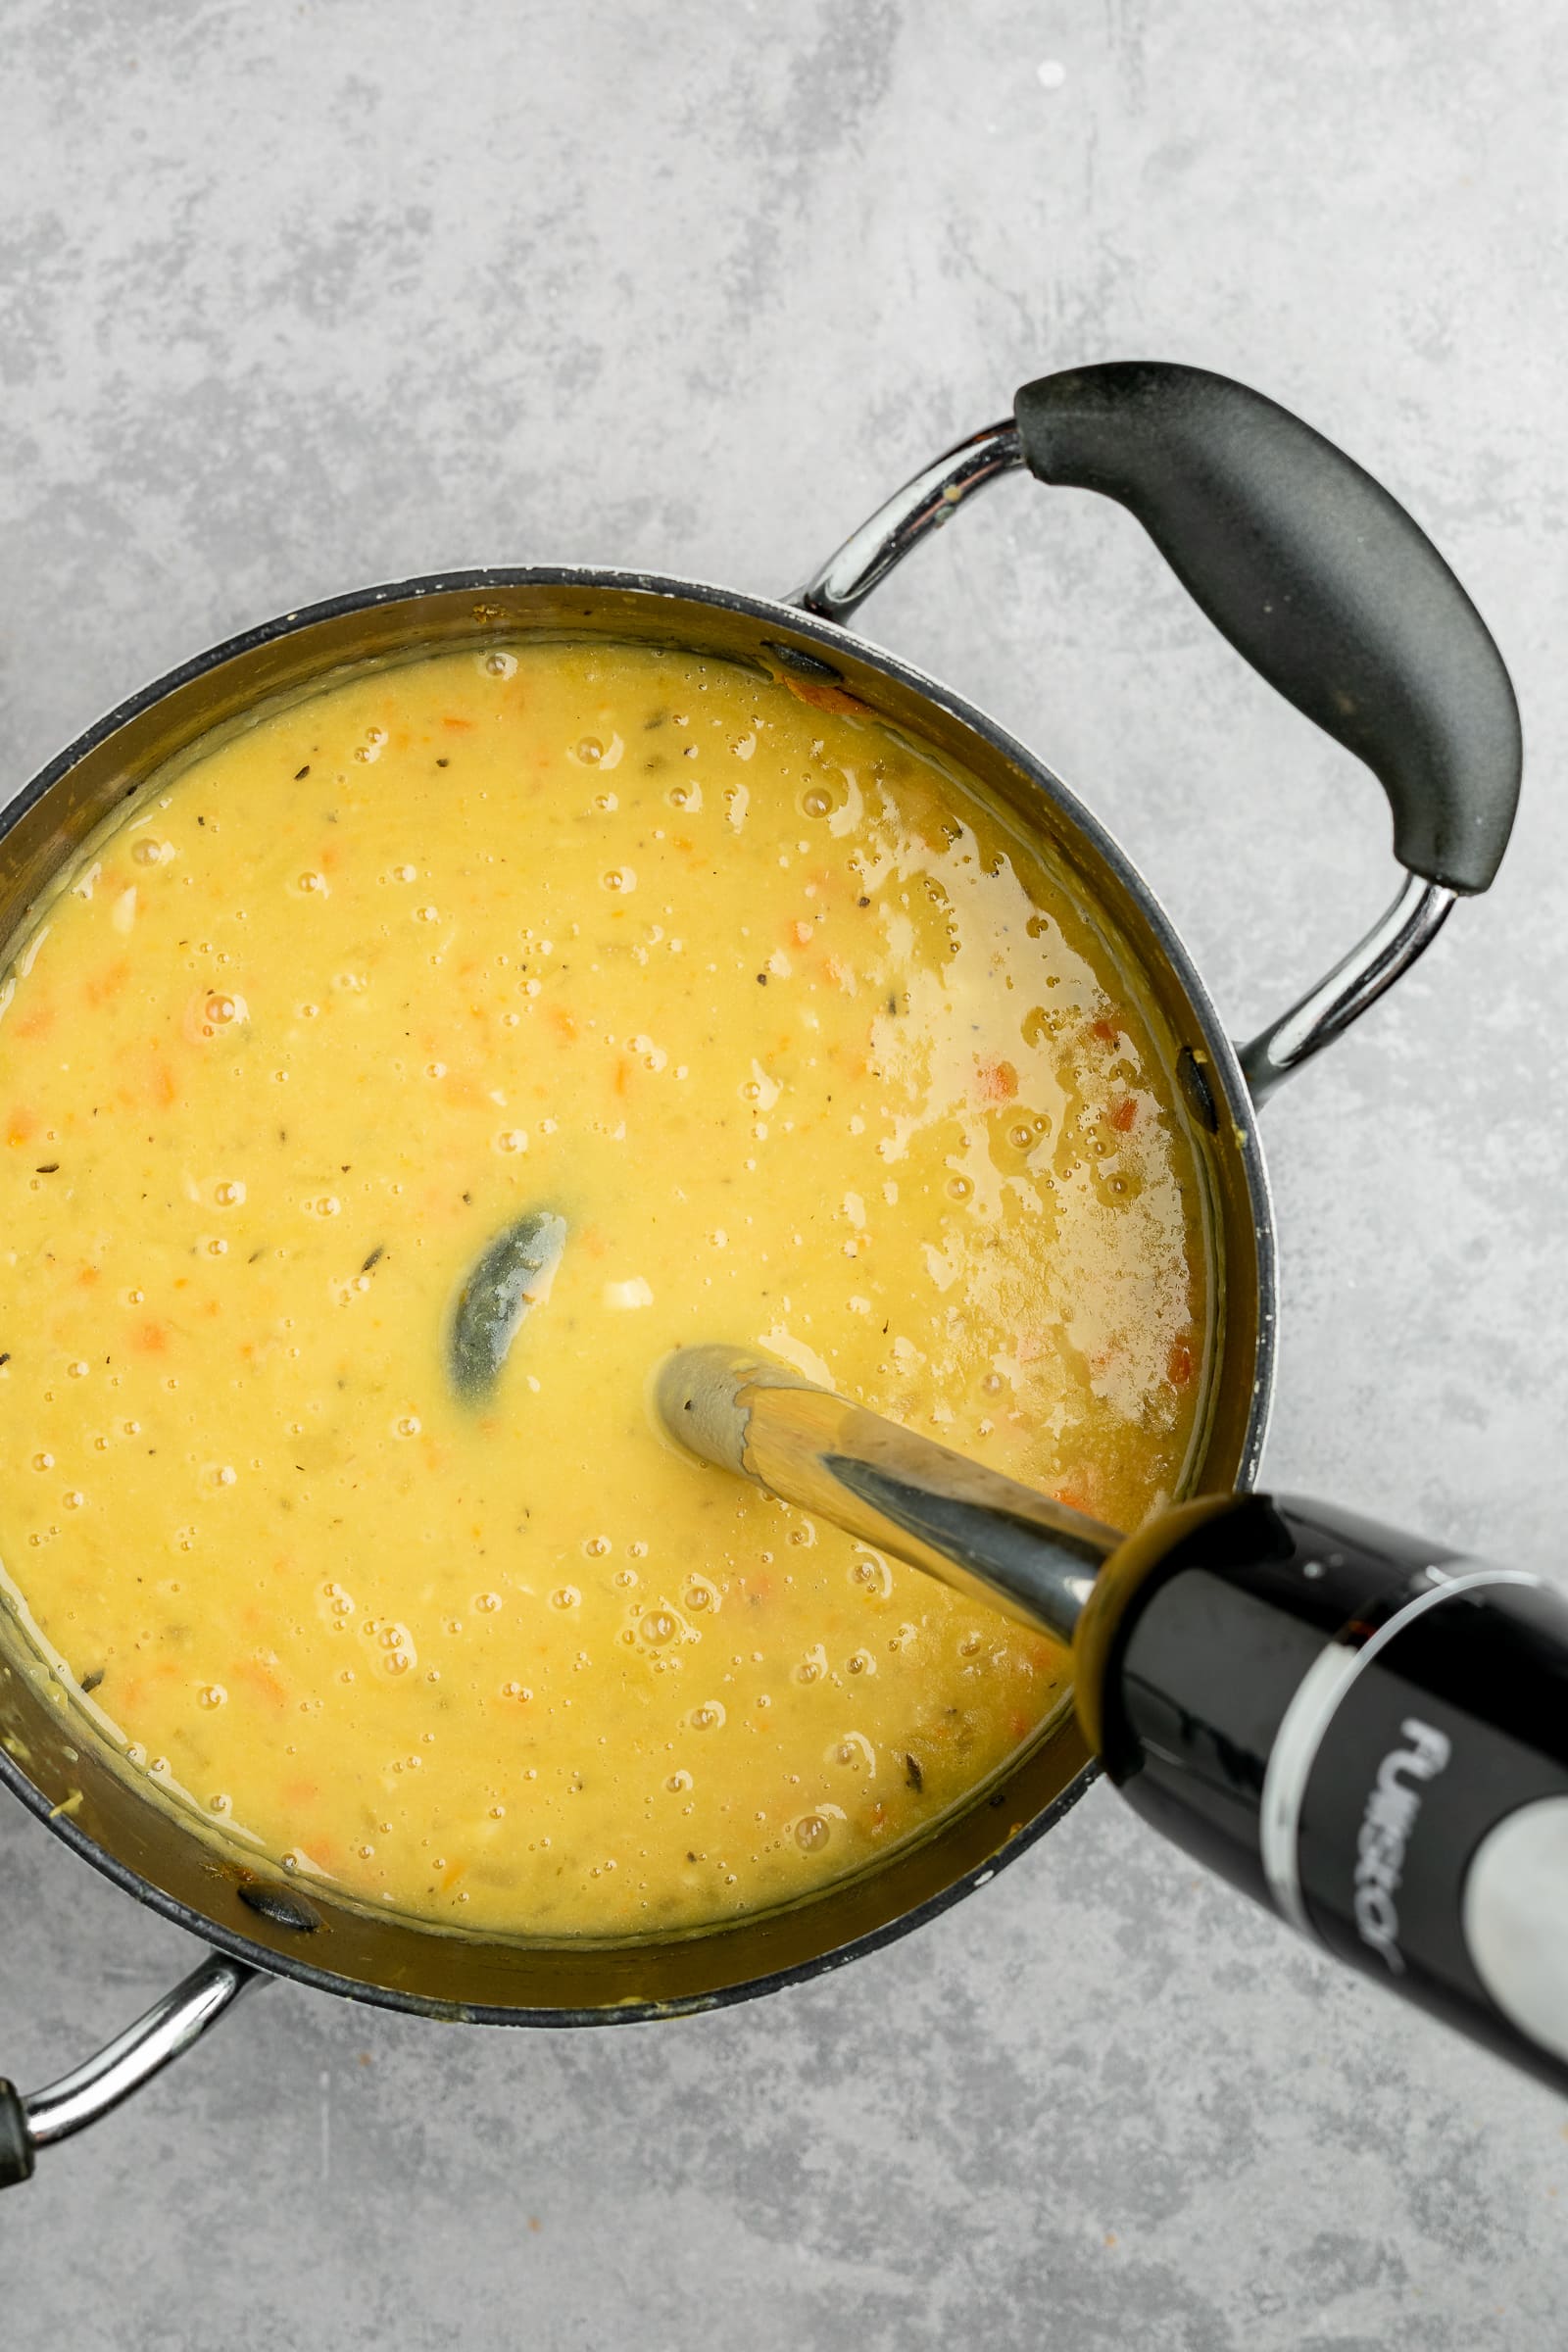 Soup being blended with an immersion blender.